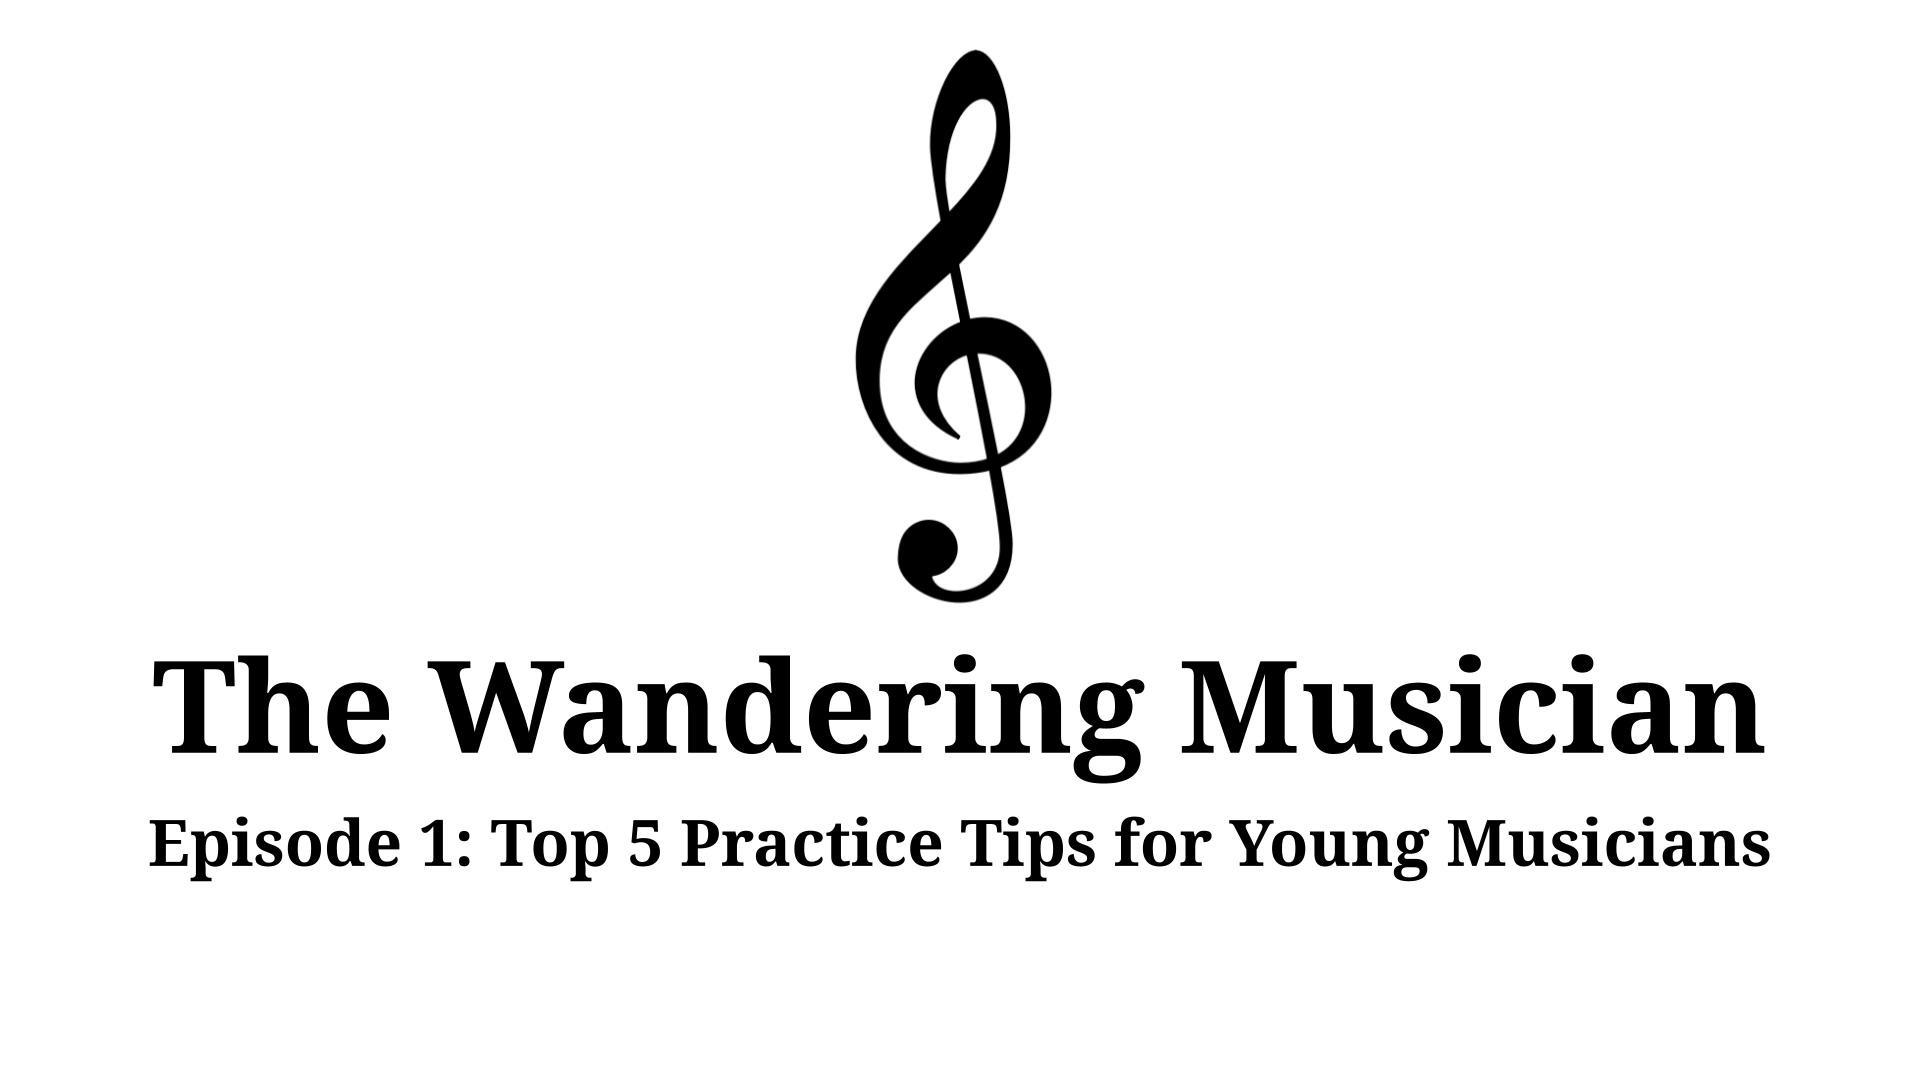 Top 5 Practice Tips for Young Musicians